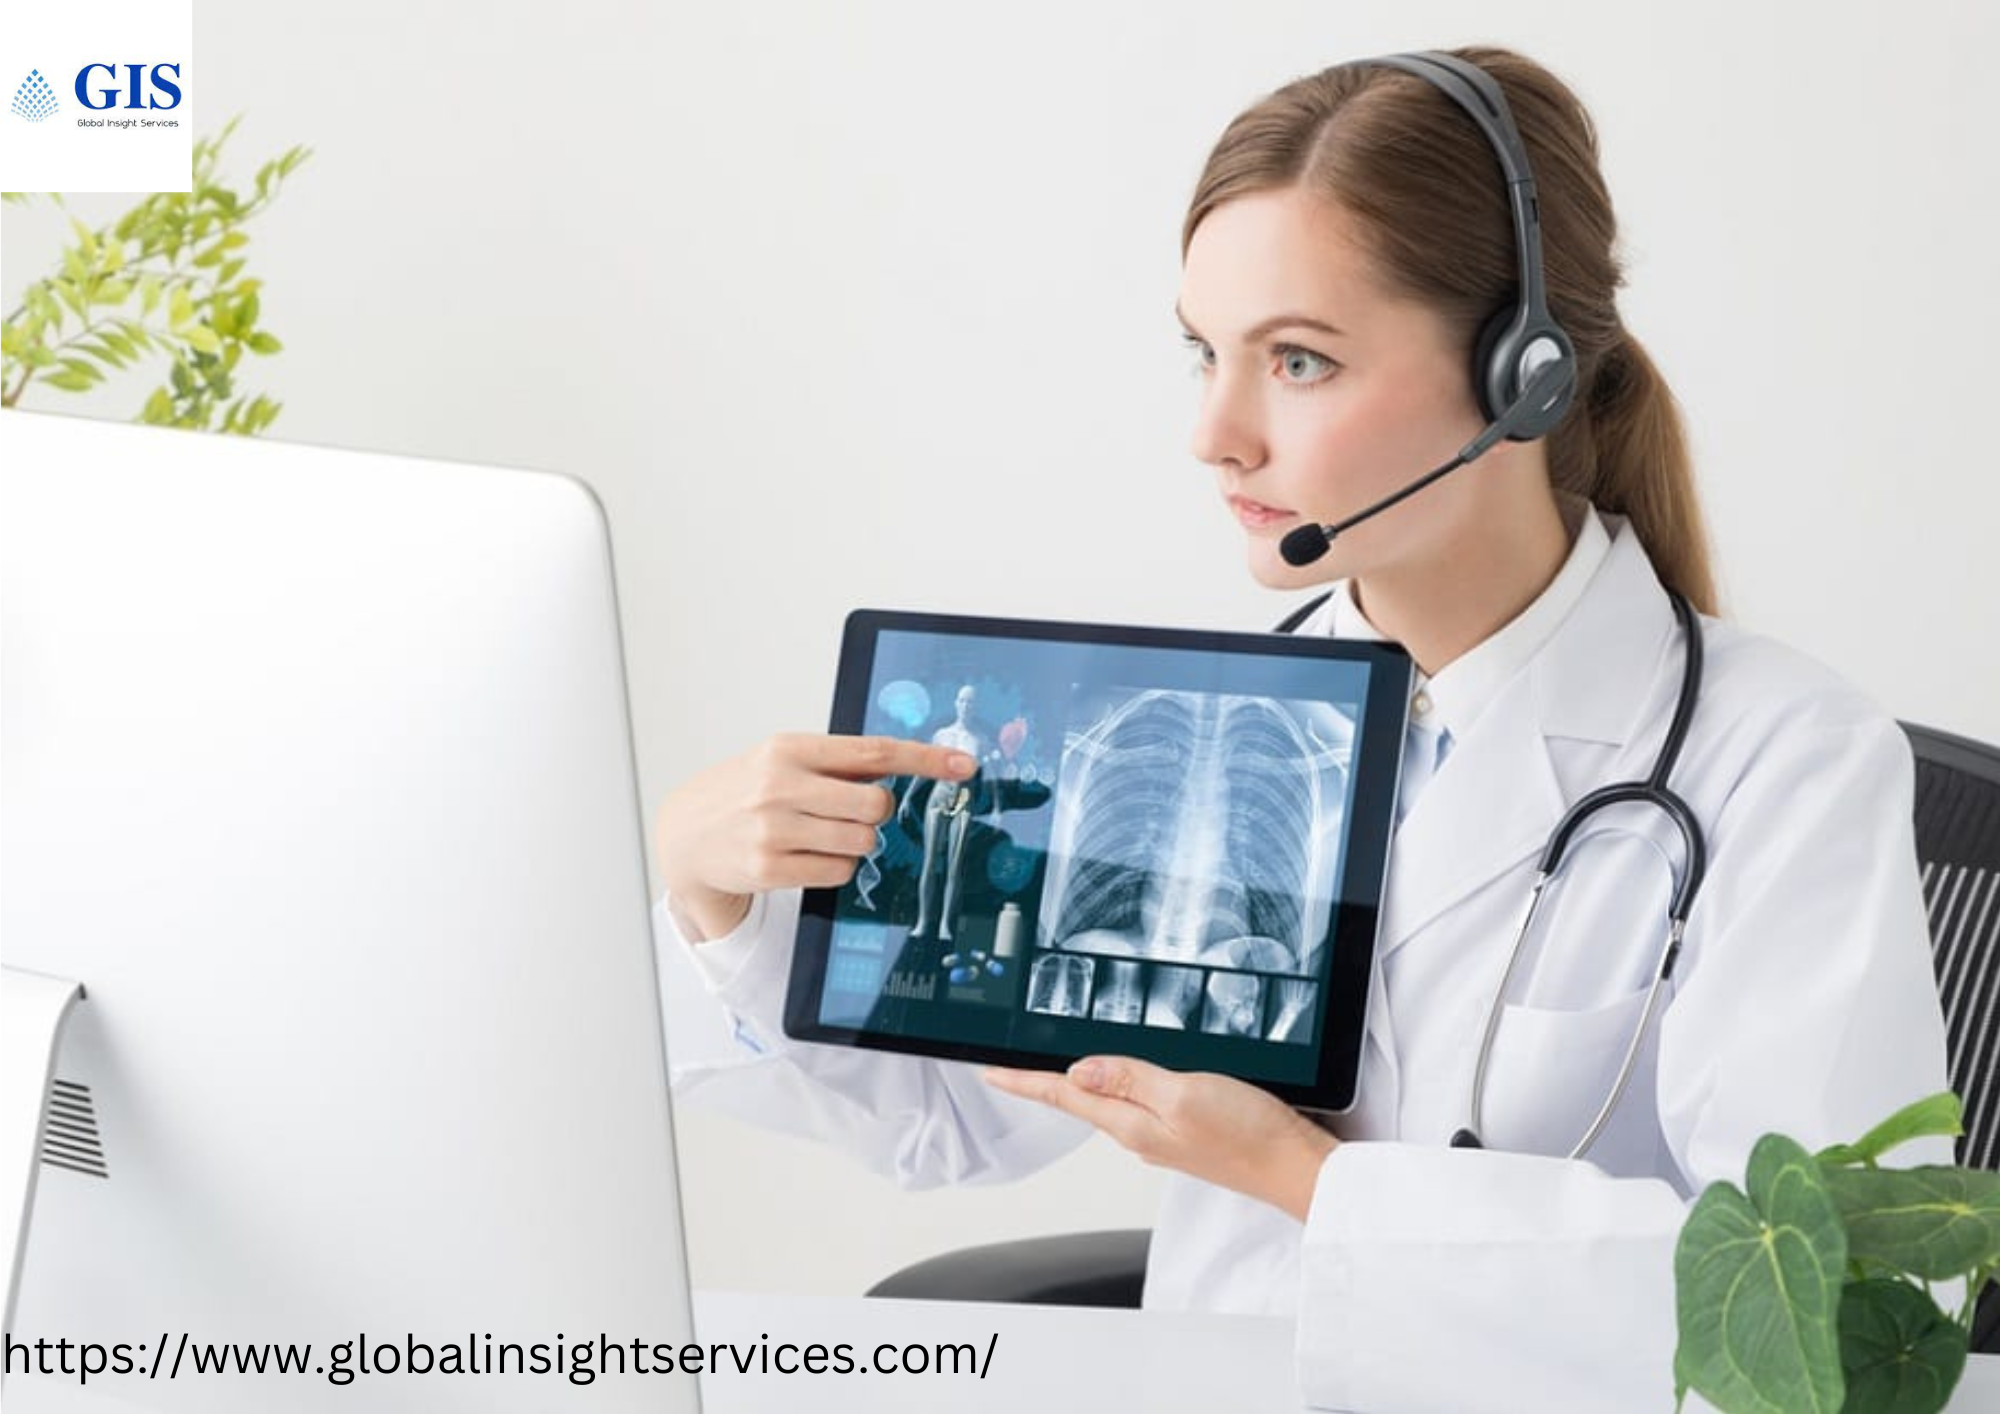 Global Telehealth & Telemedicine Market Valued at $92.4 Billion in 2022, Expected to Reach $184.6 Billion by 2033 with a 7.2% CAGR